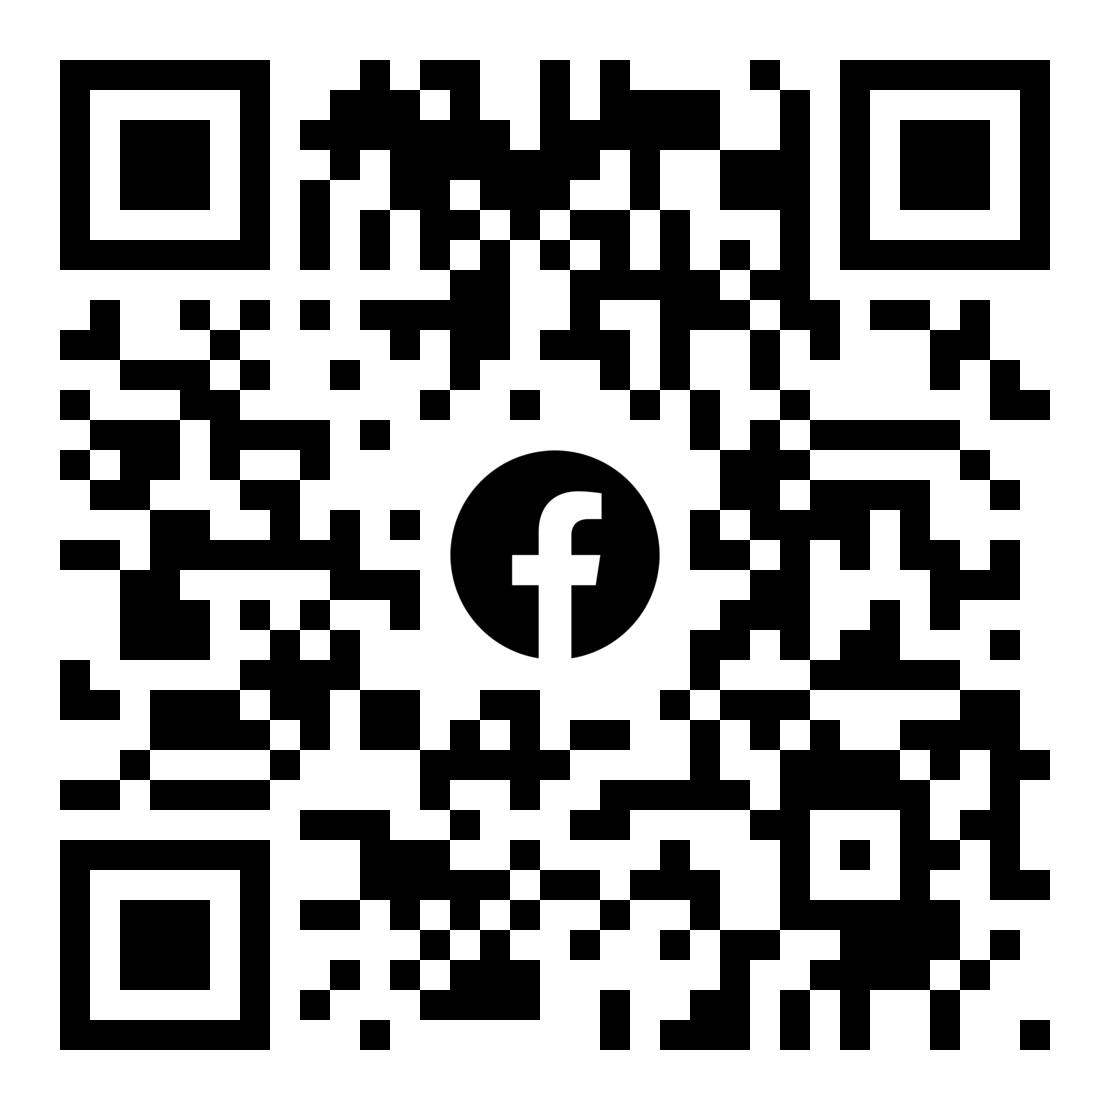 The QR code to join the murder & mayhem book club Facebook page